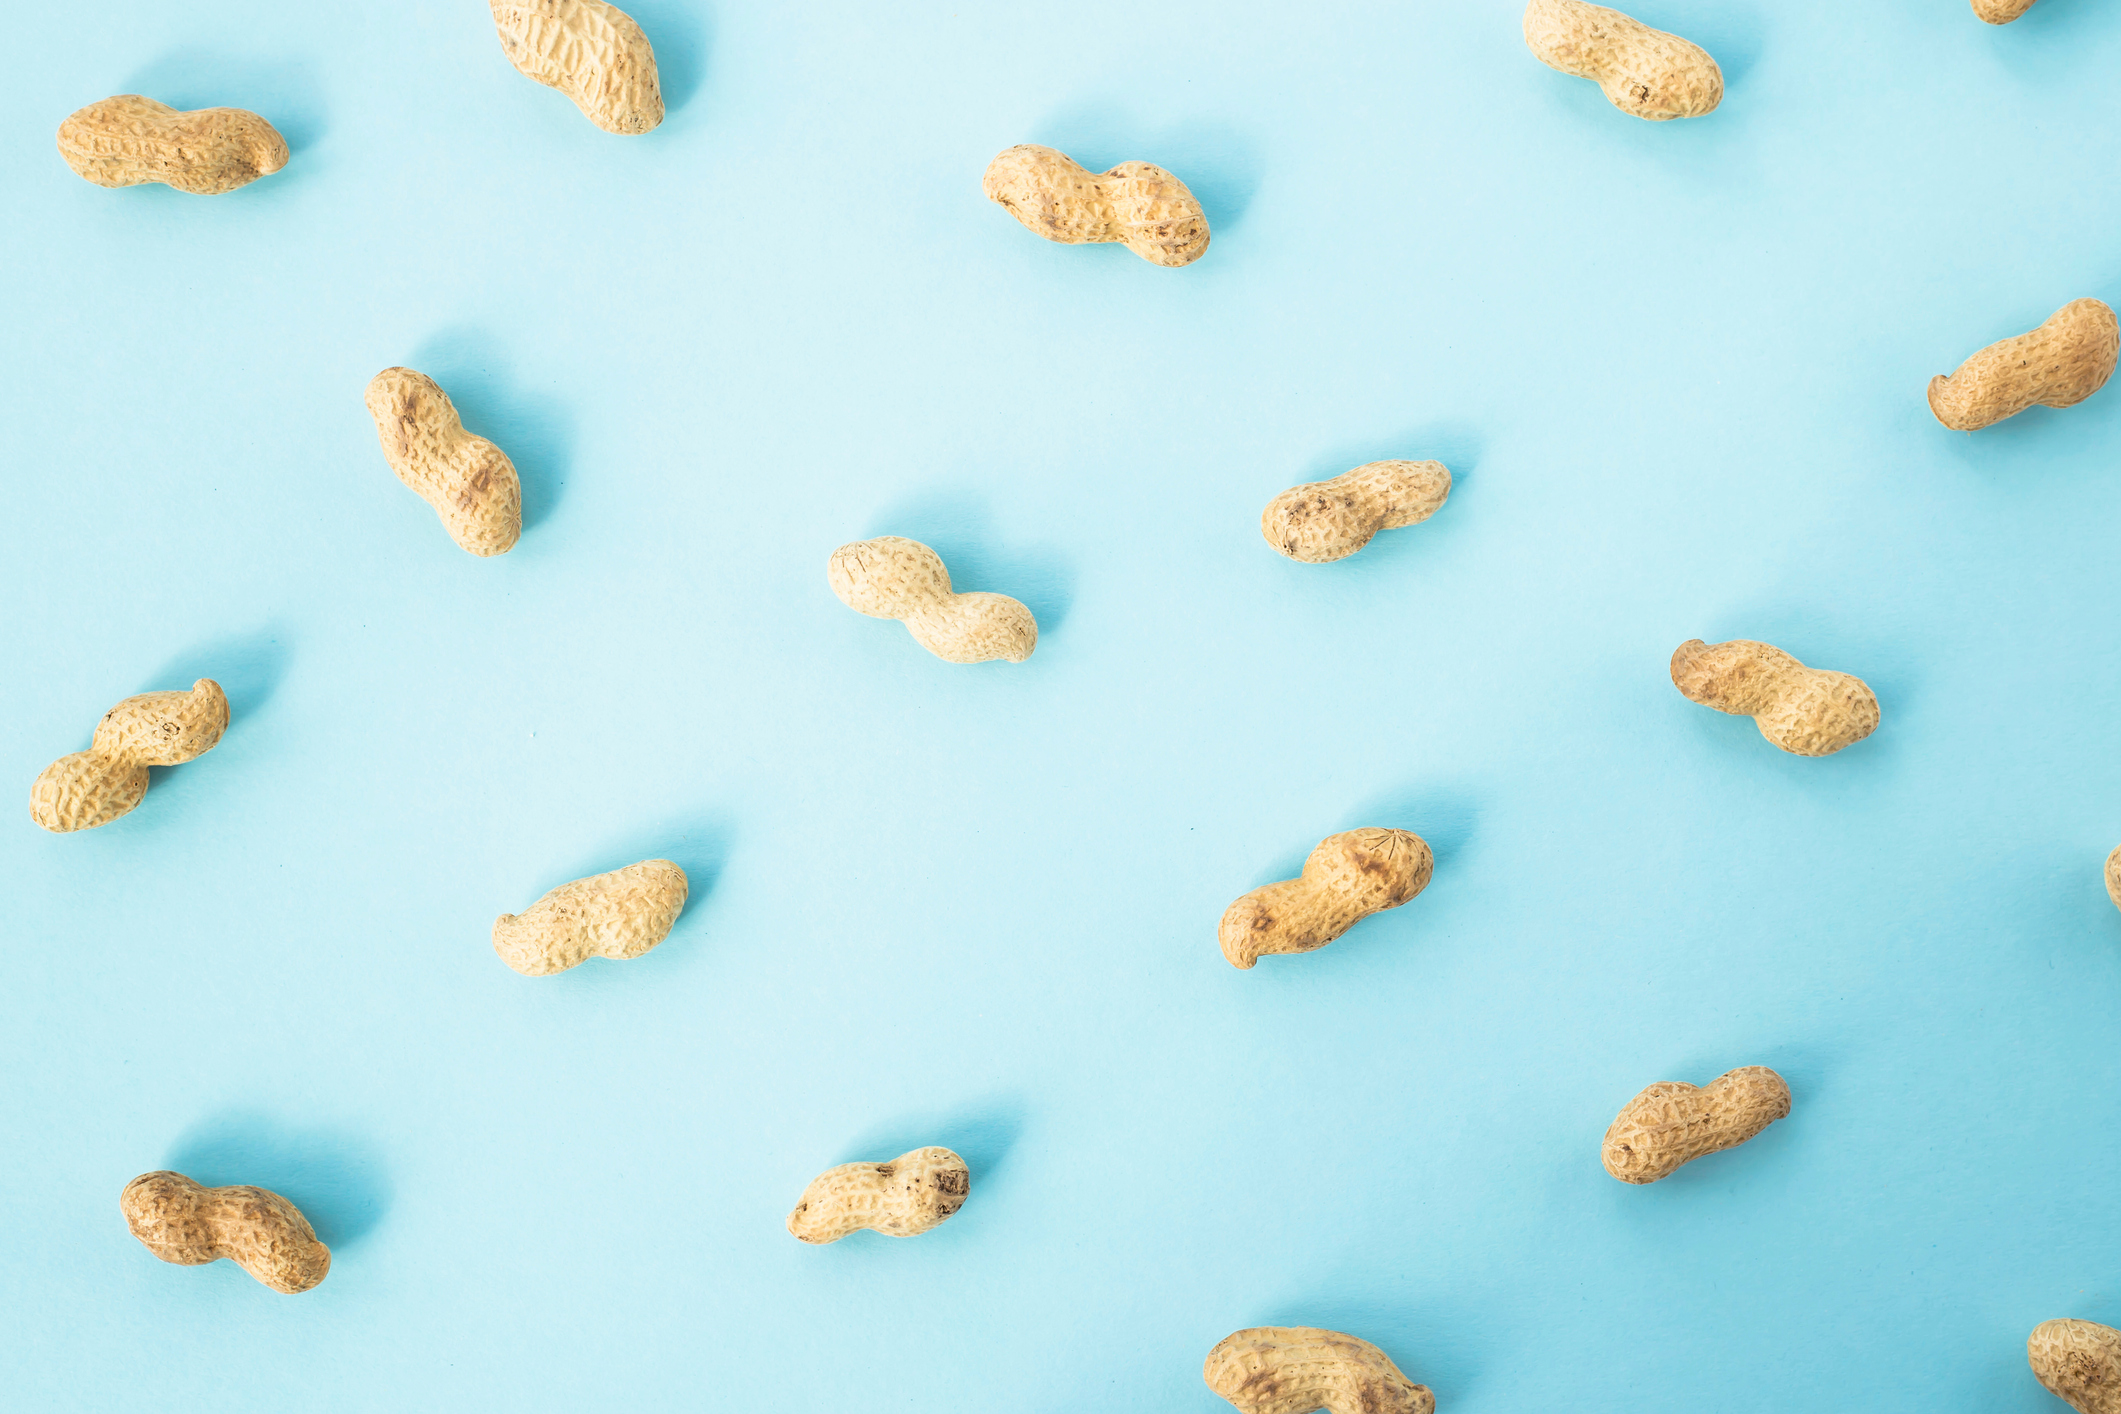 Peanuts against blue background